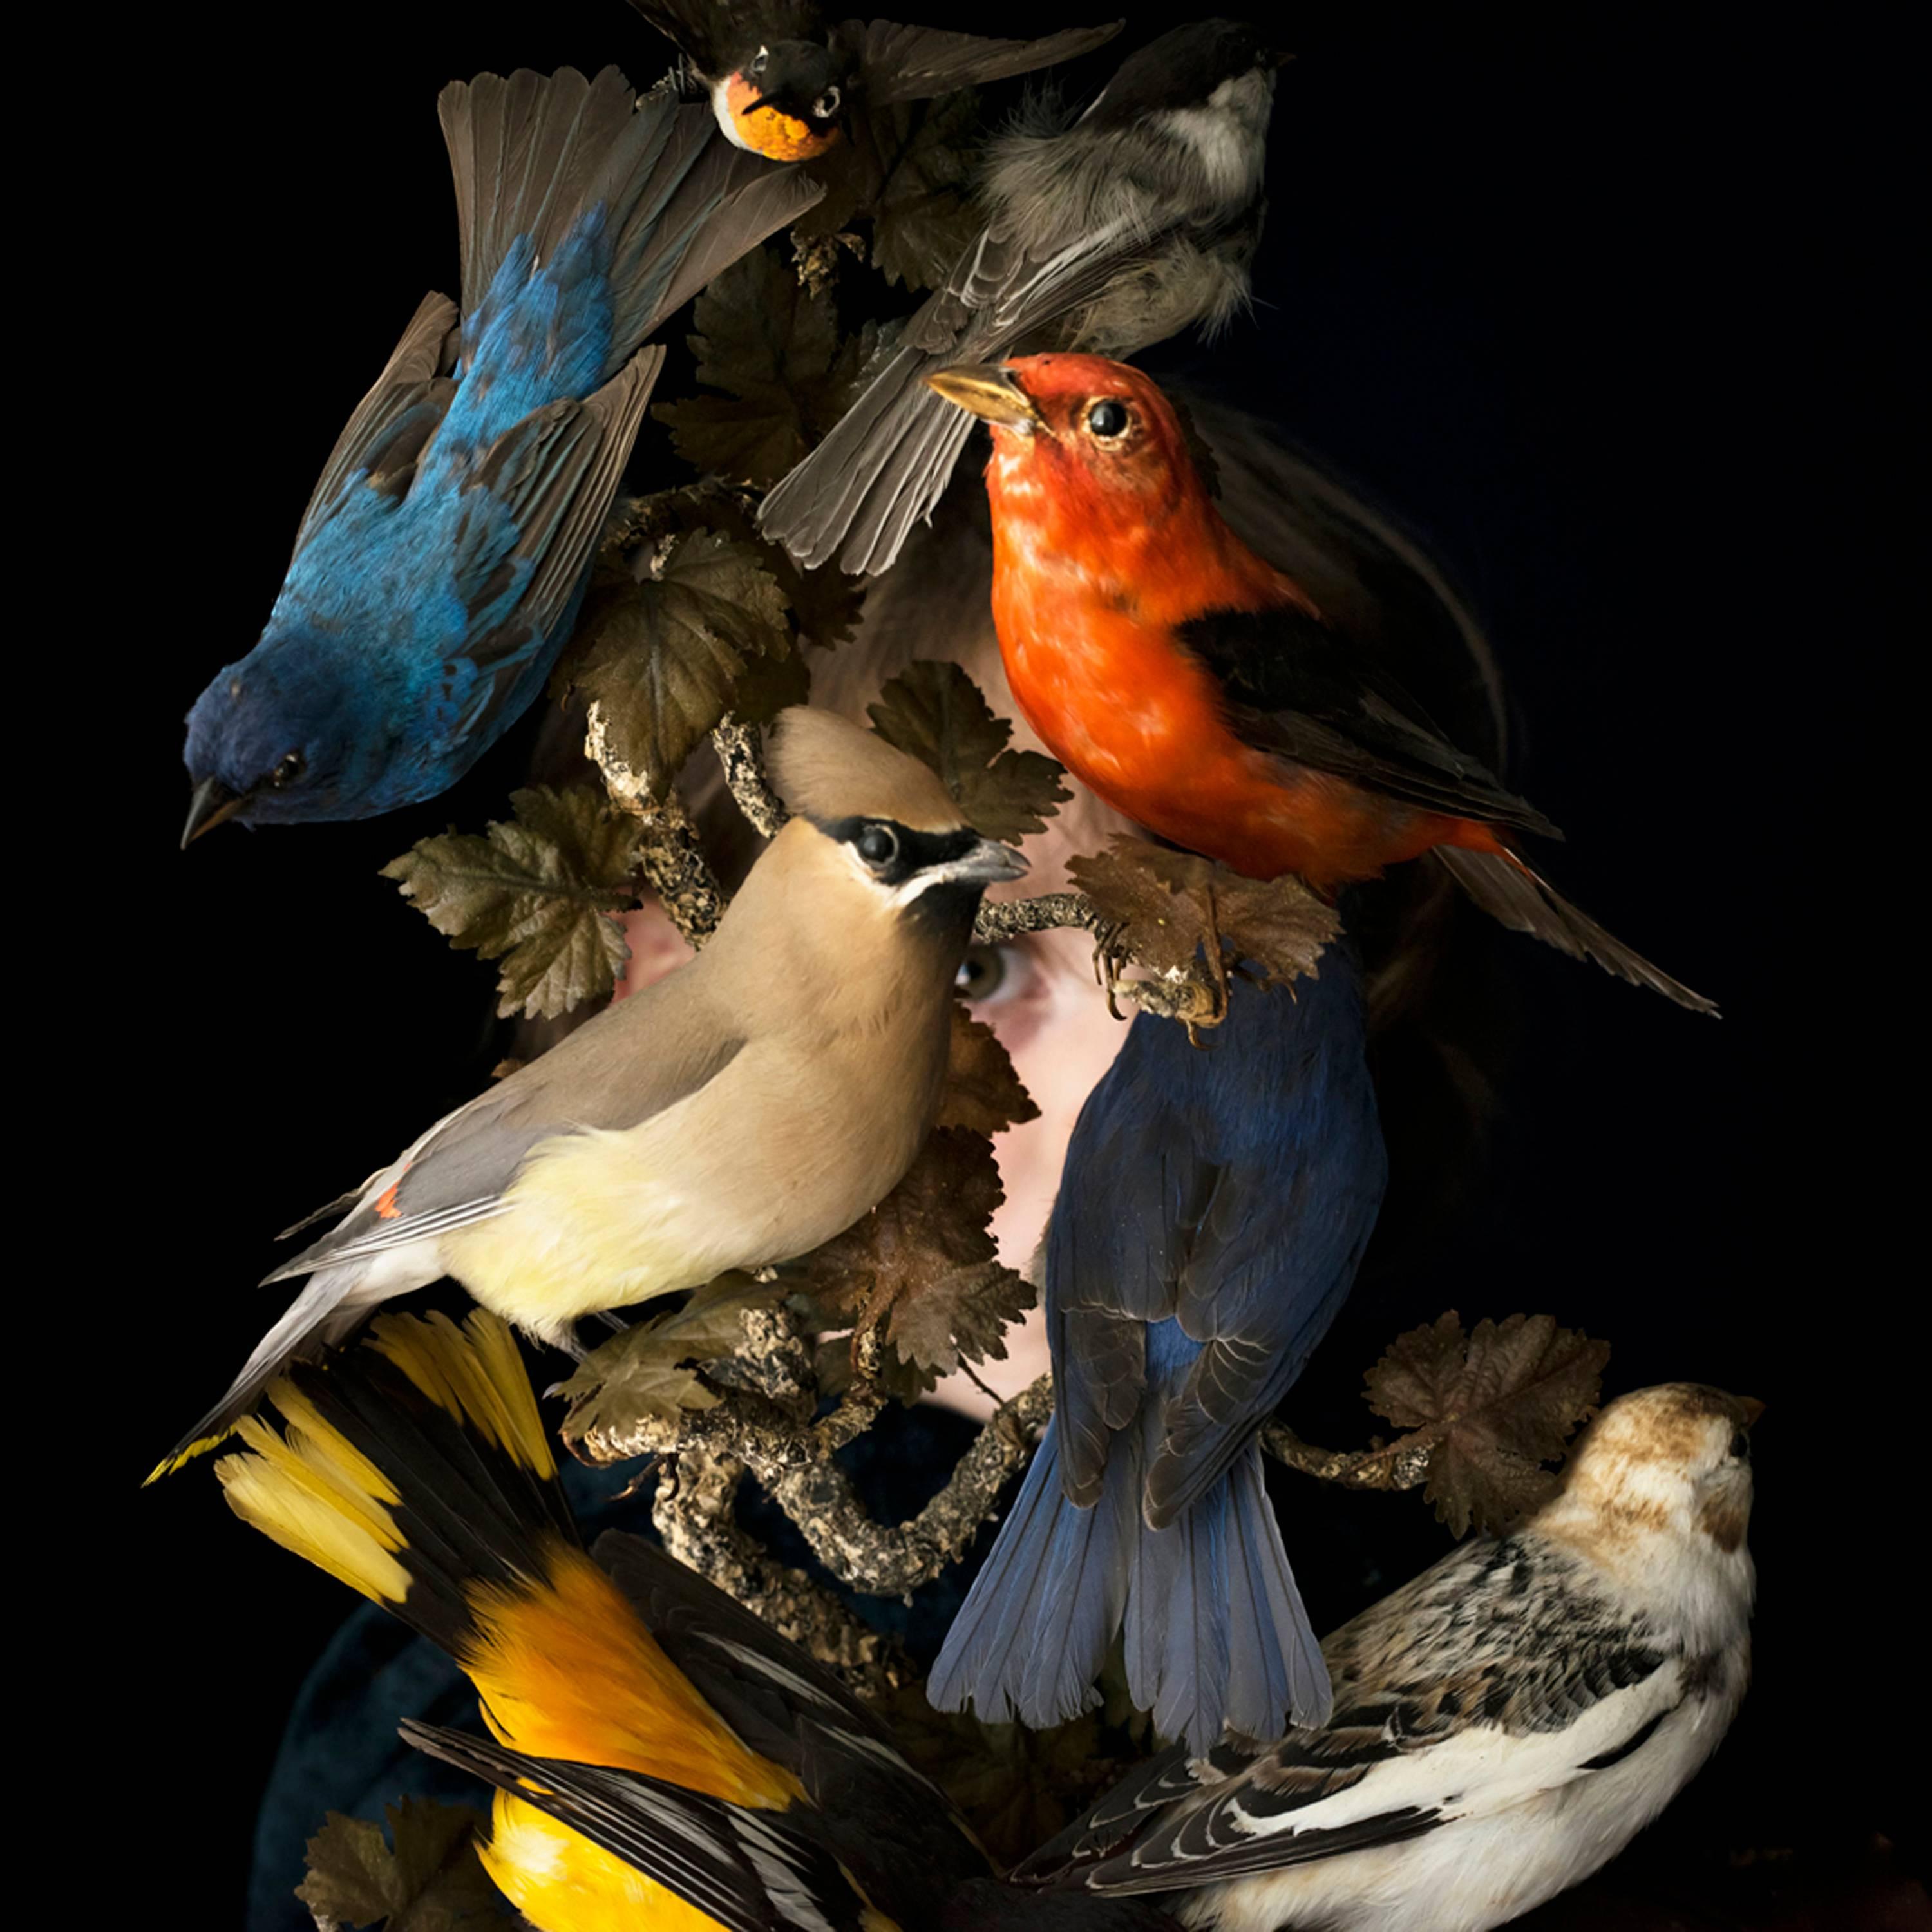 Birds of New England, Rockport, Maine, 2016 - Cig Harvey (Colour Photography)
Signed and numbered on reverse
Digital c-type print

Available in three sizes:
14 x 14 inches, edition of 10
28 x 28 inches, edition of 7
40 x 40 inches, edition of